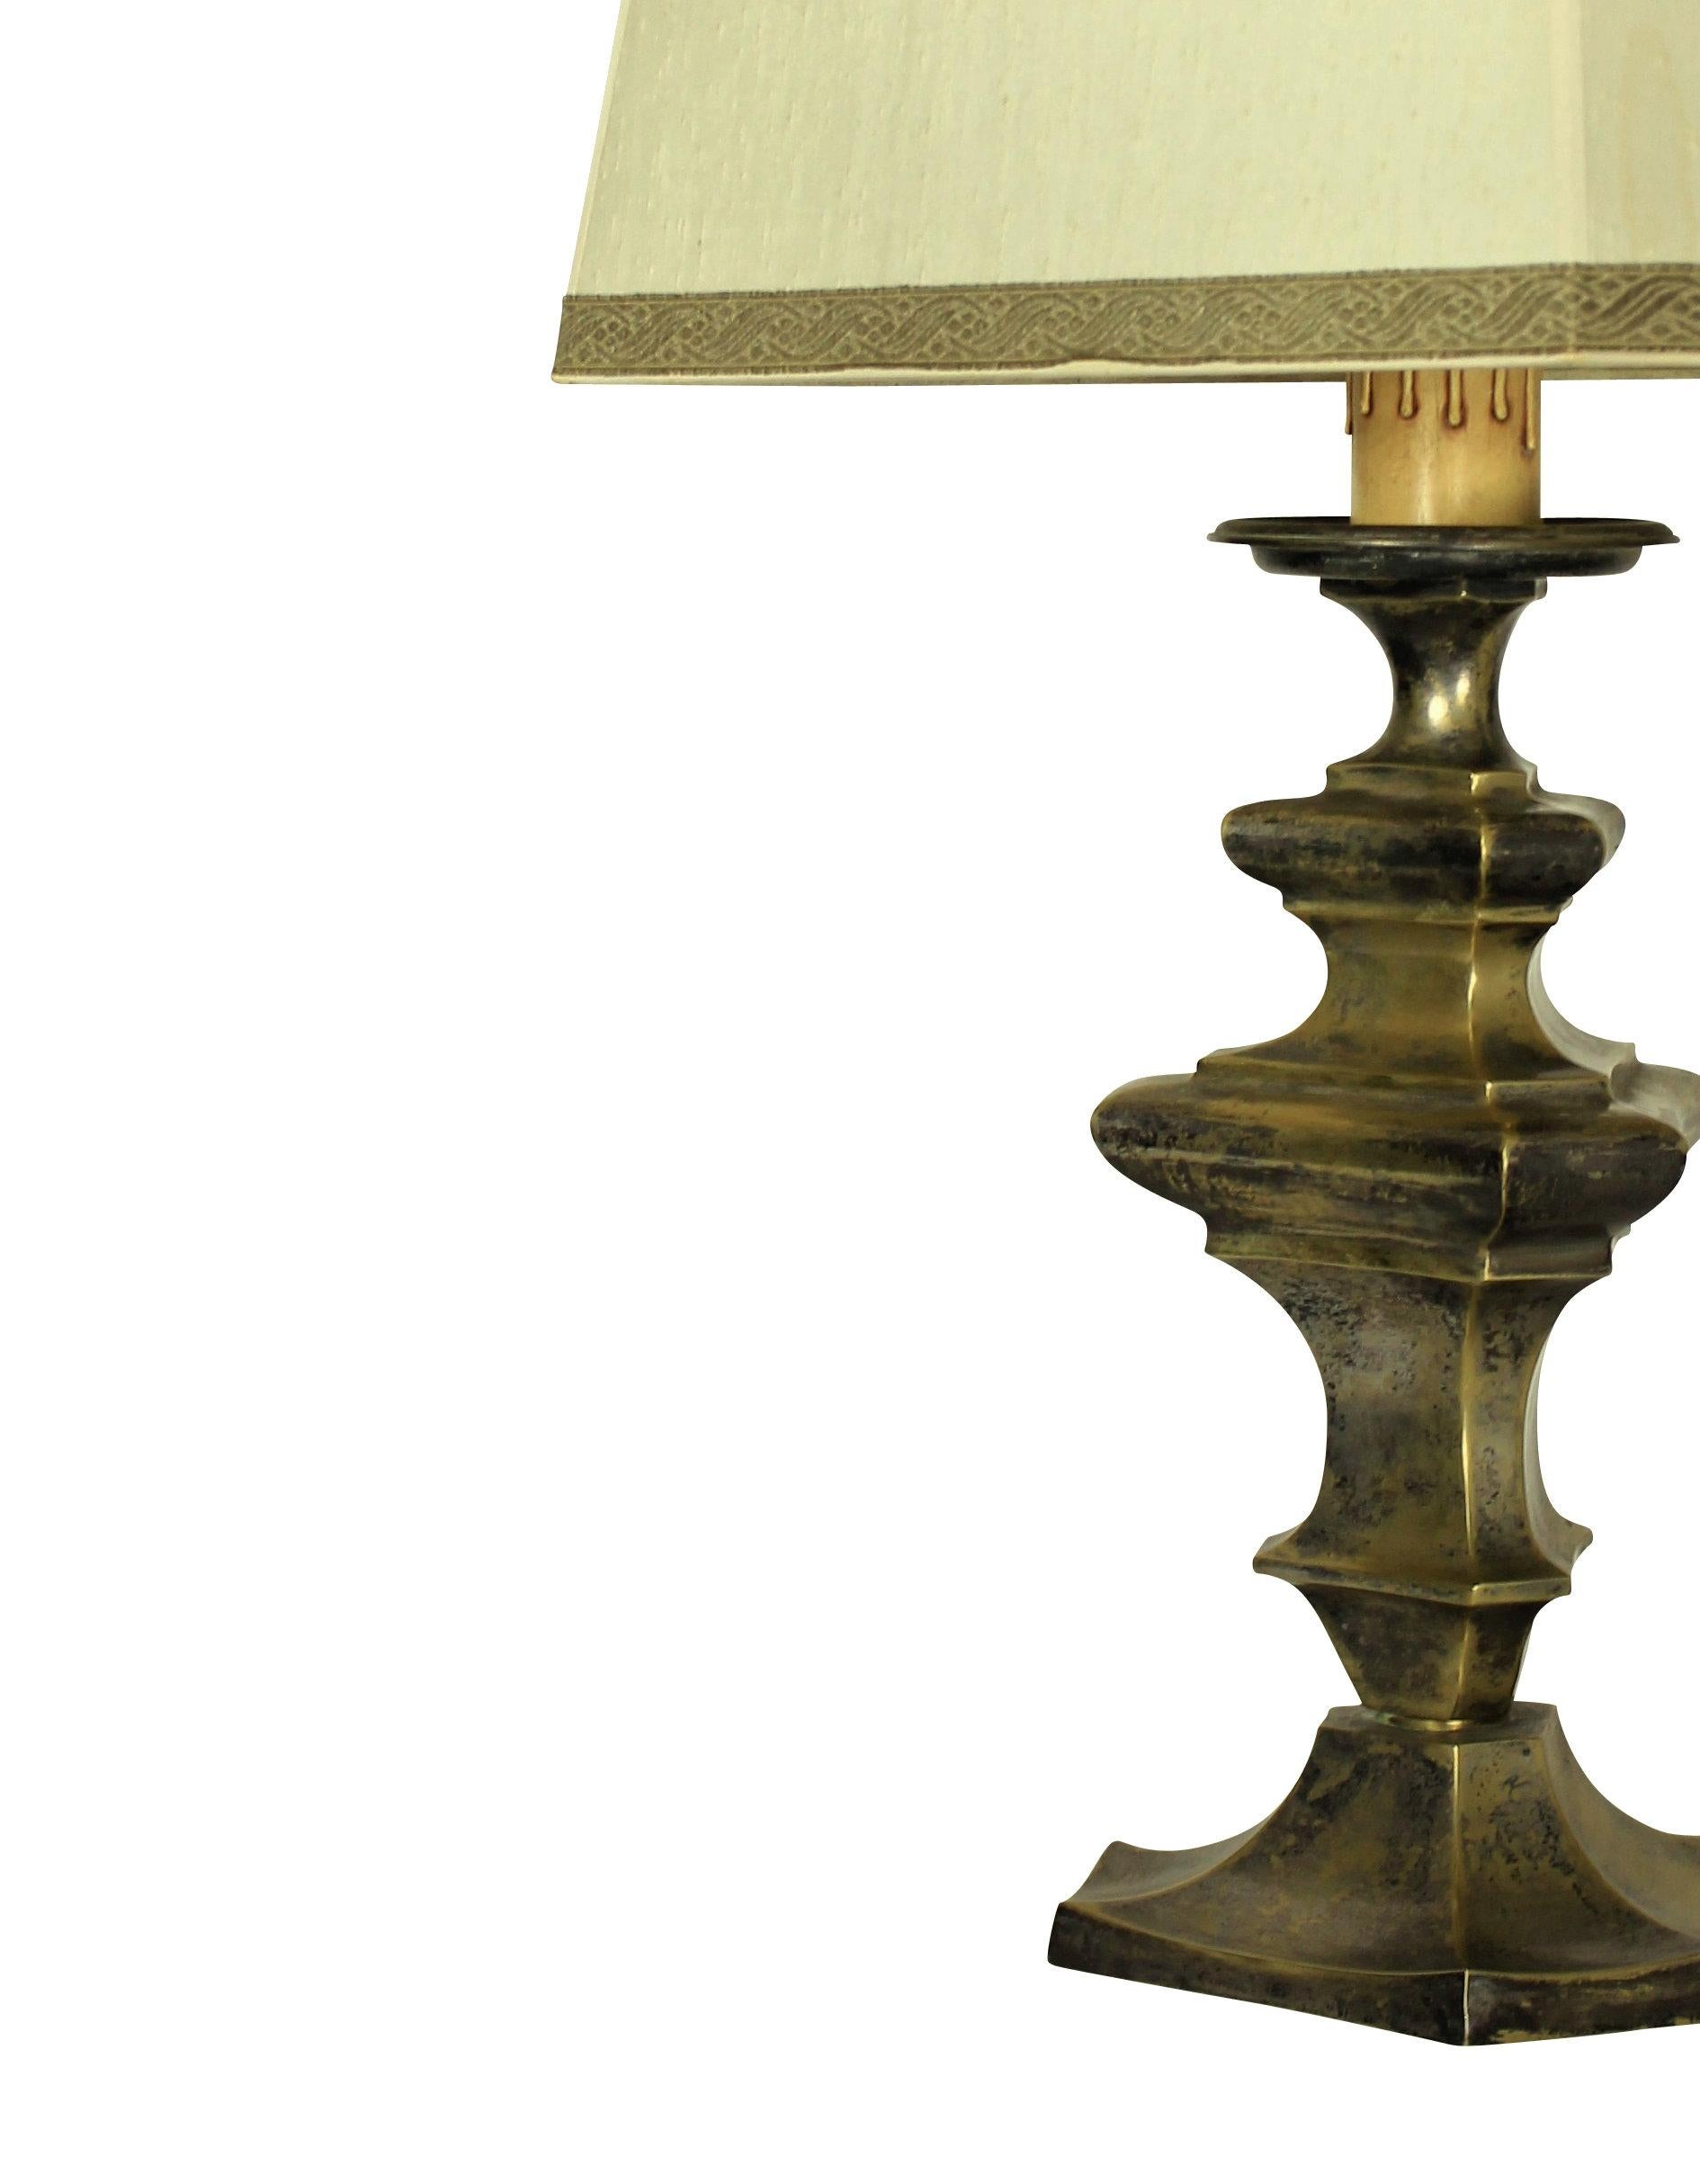 A Flemish lamp (formerly a candlestick) in silvered brass.